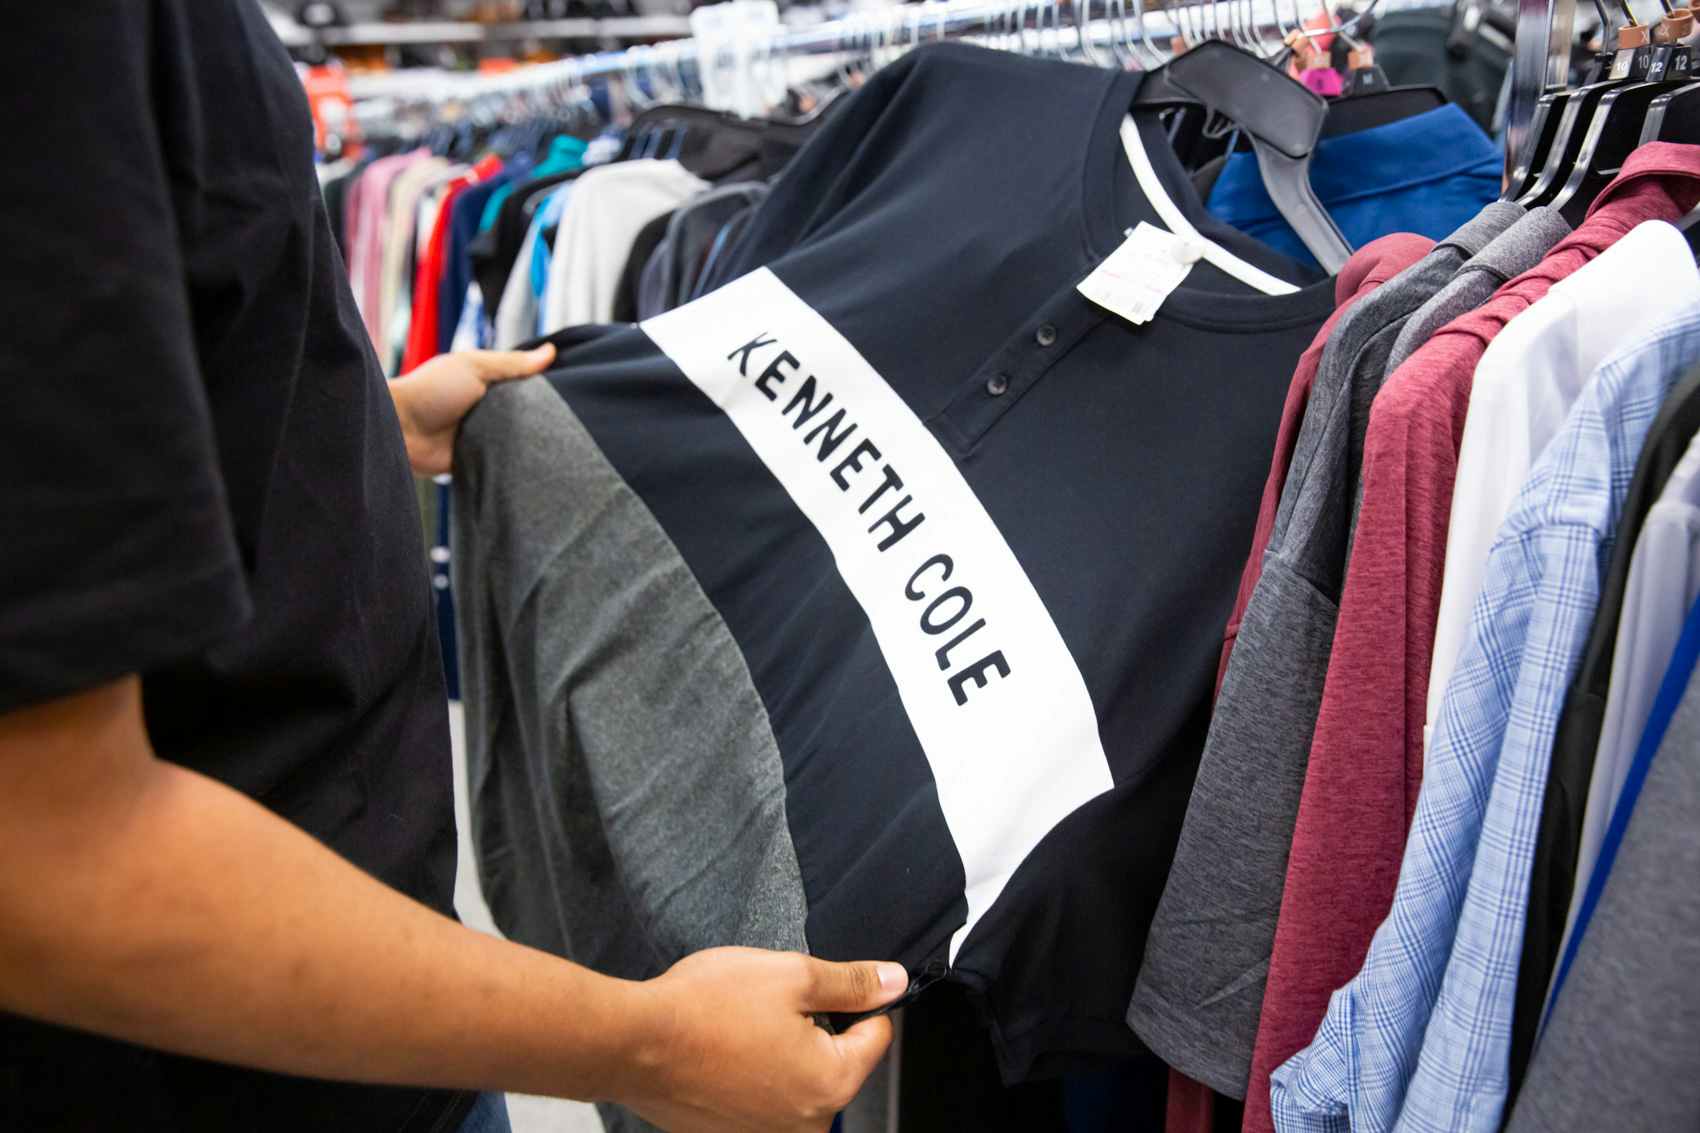 Person shopping with kenneth cole name brand shirt inside a ross